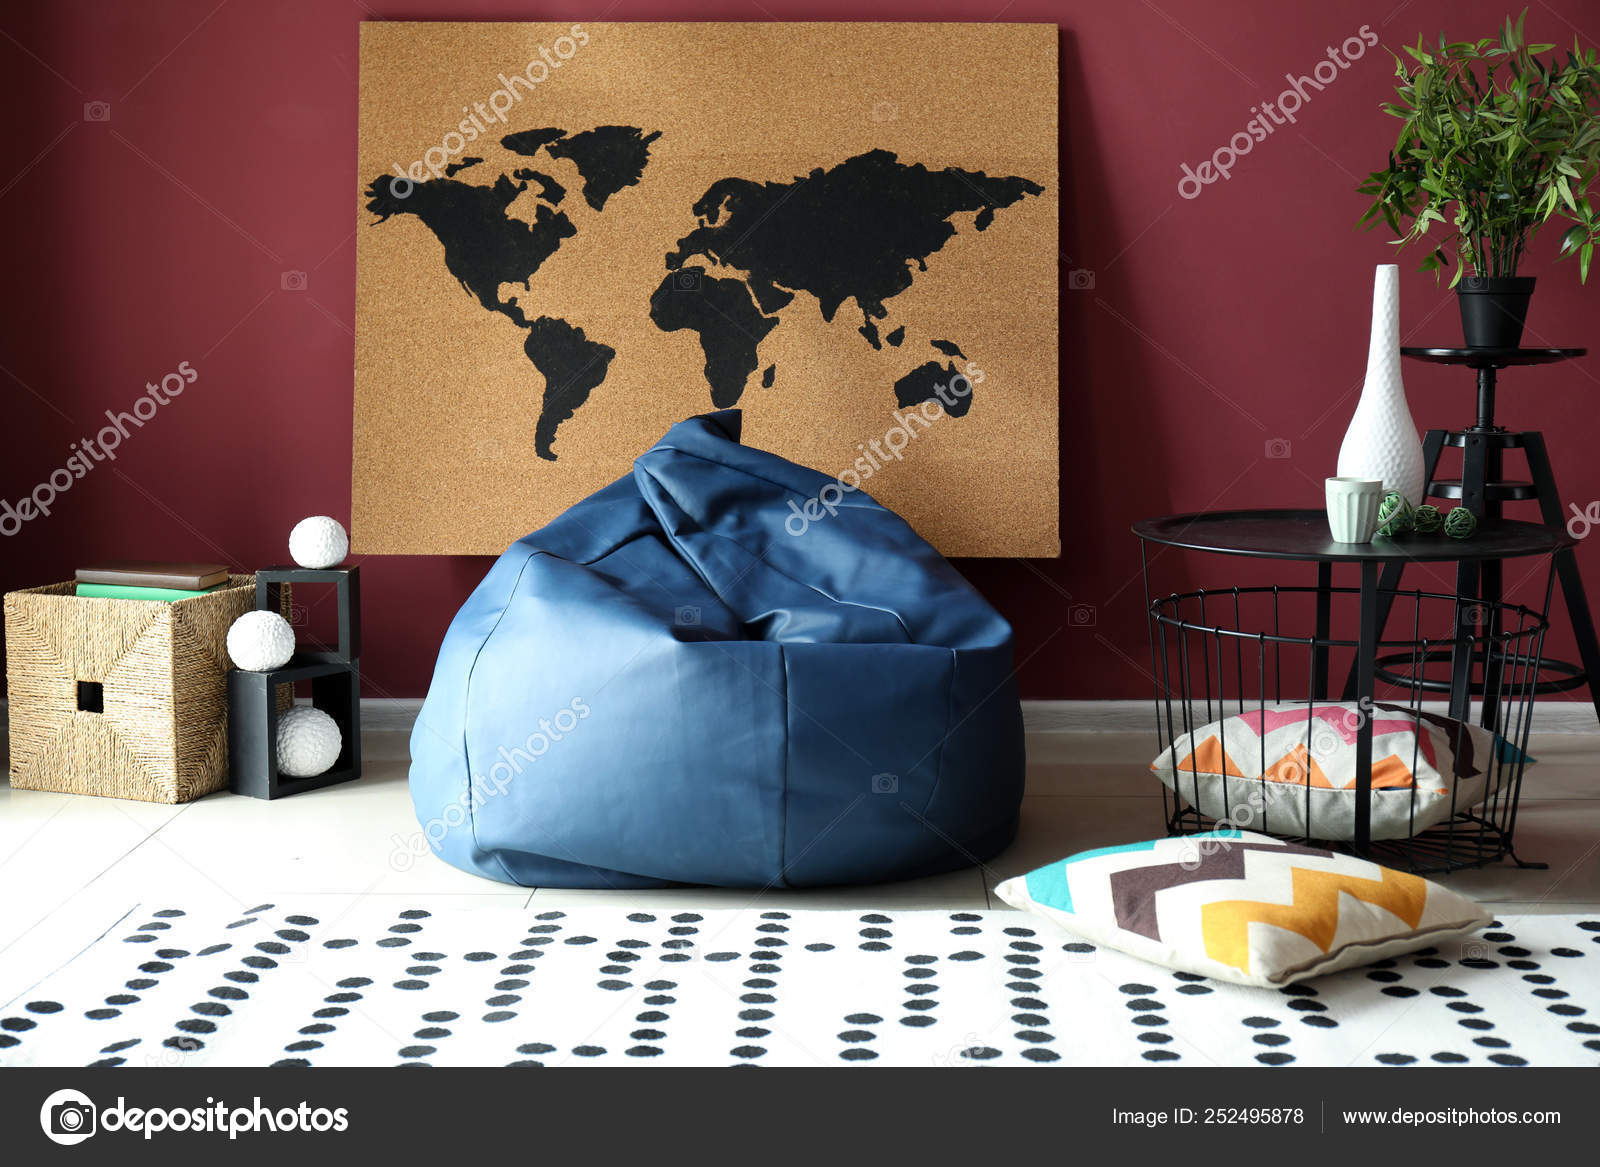 interior-of-modern-room-with-picture-of-world-map-on-wall-stock-photo